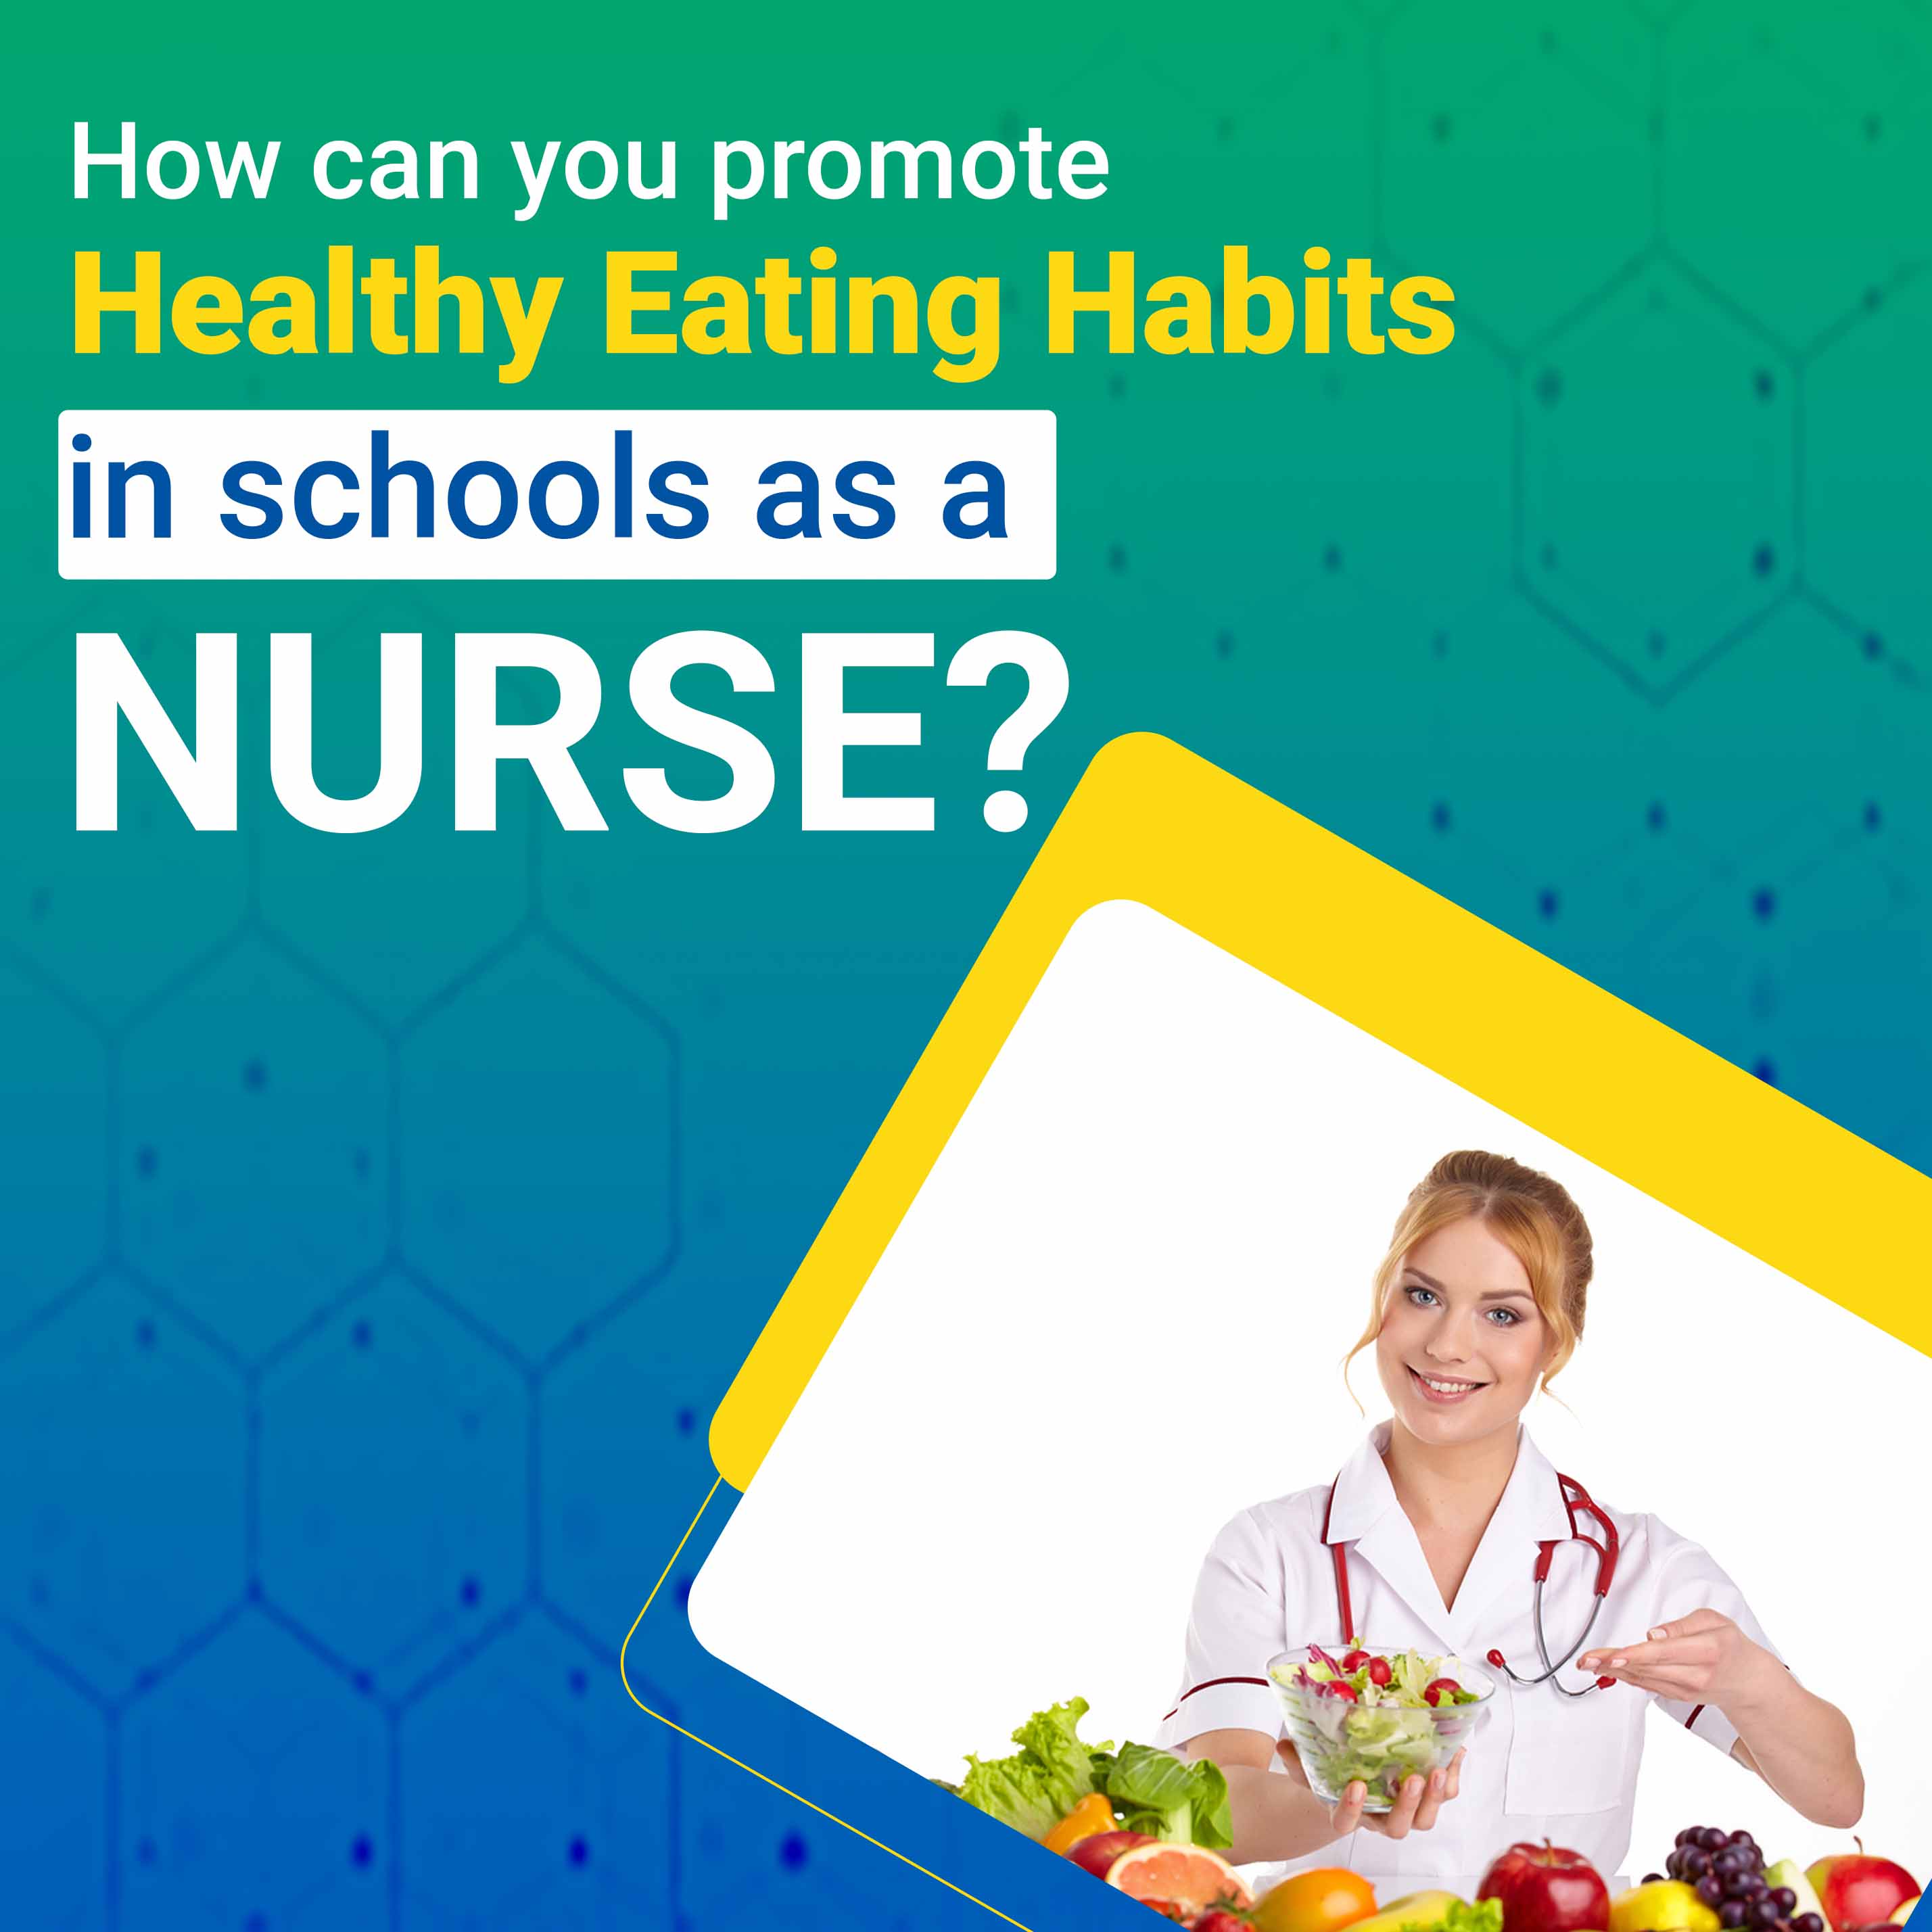 How can you promote Healthy Eating Habits in schools as a nurse?